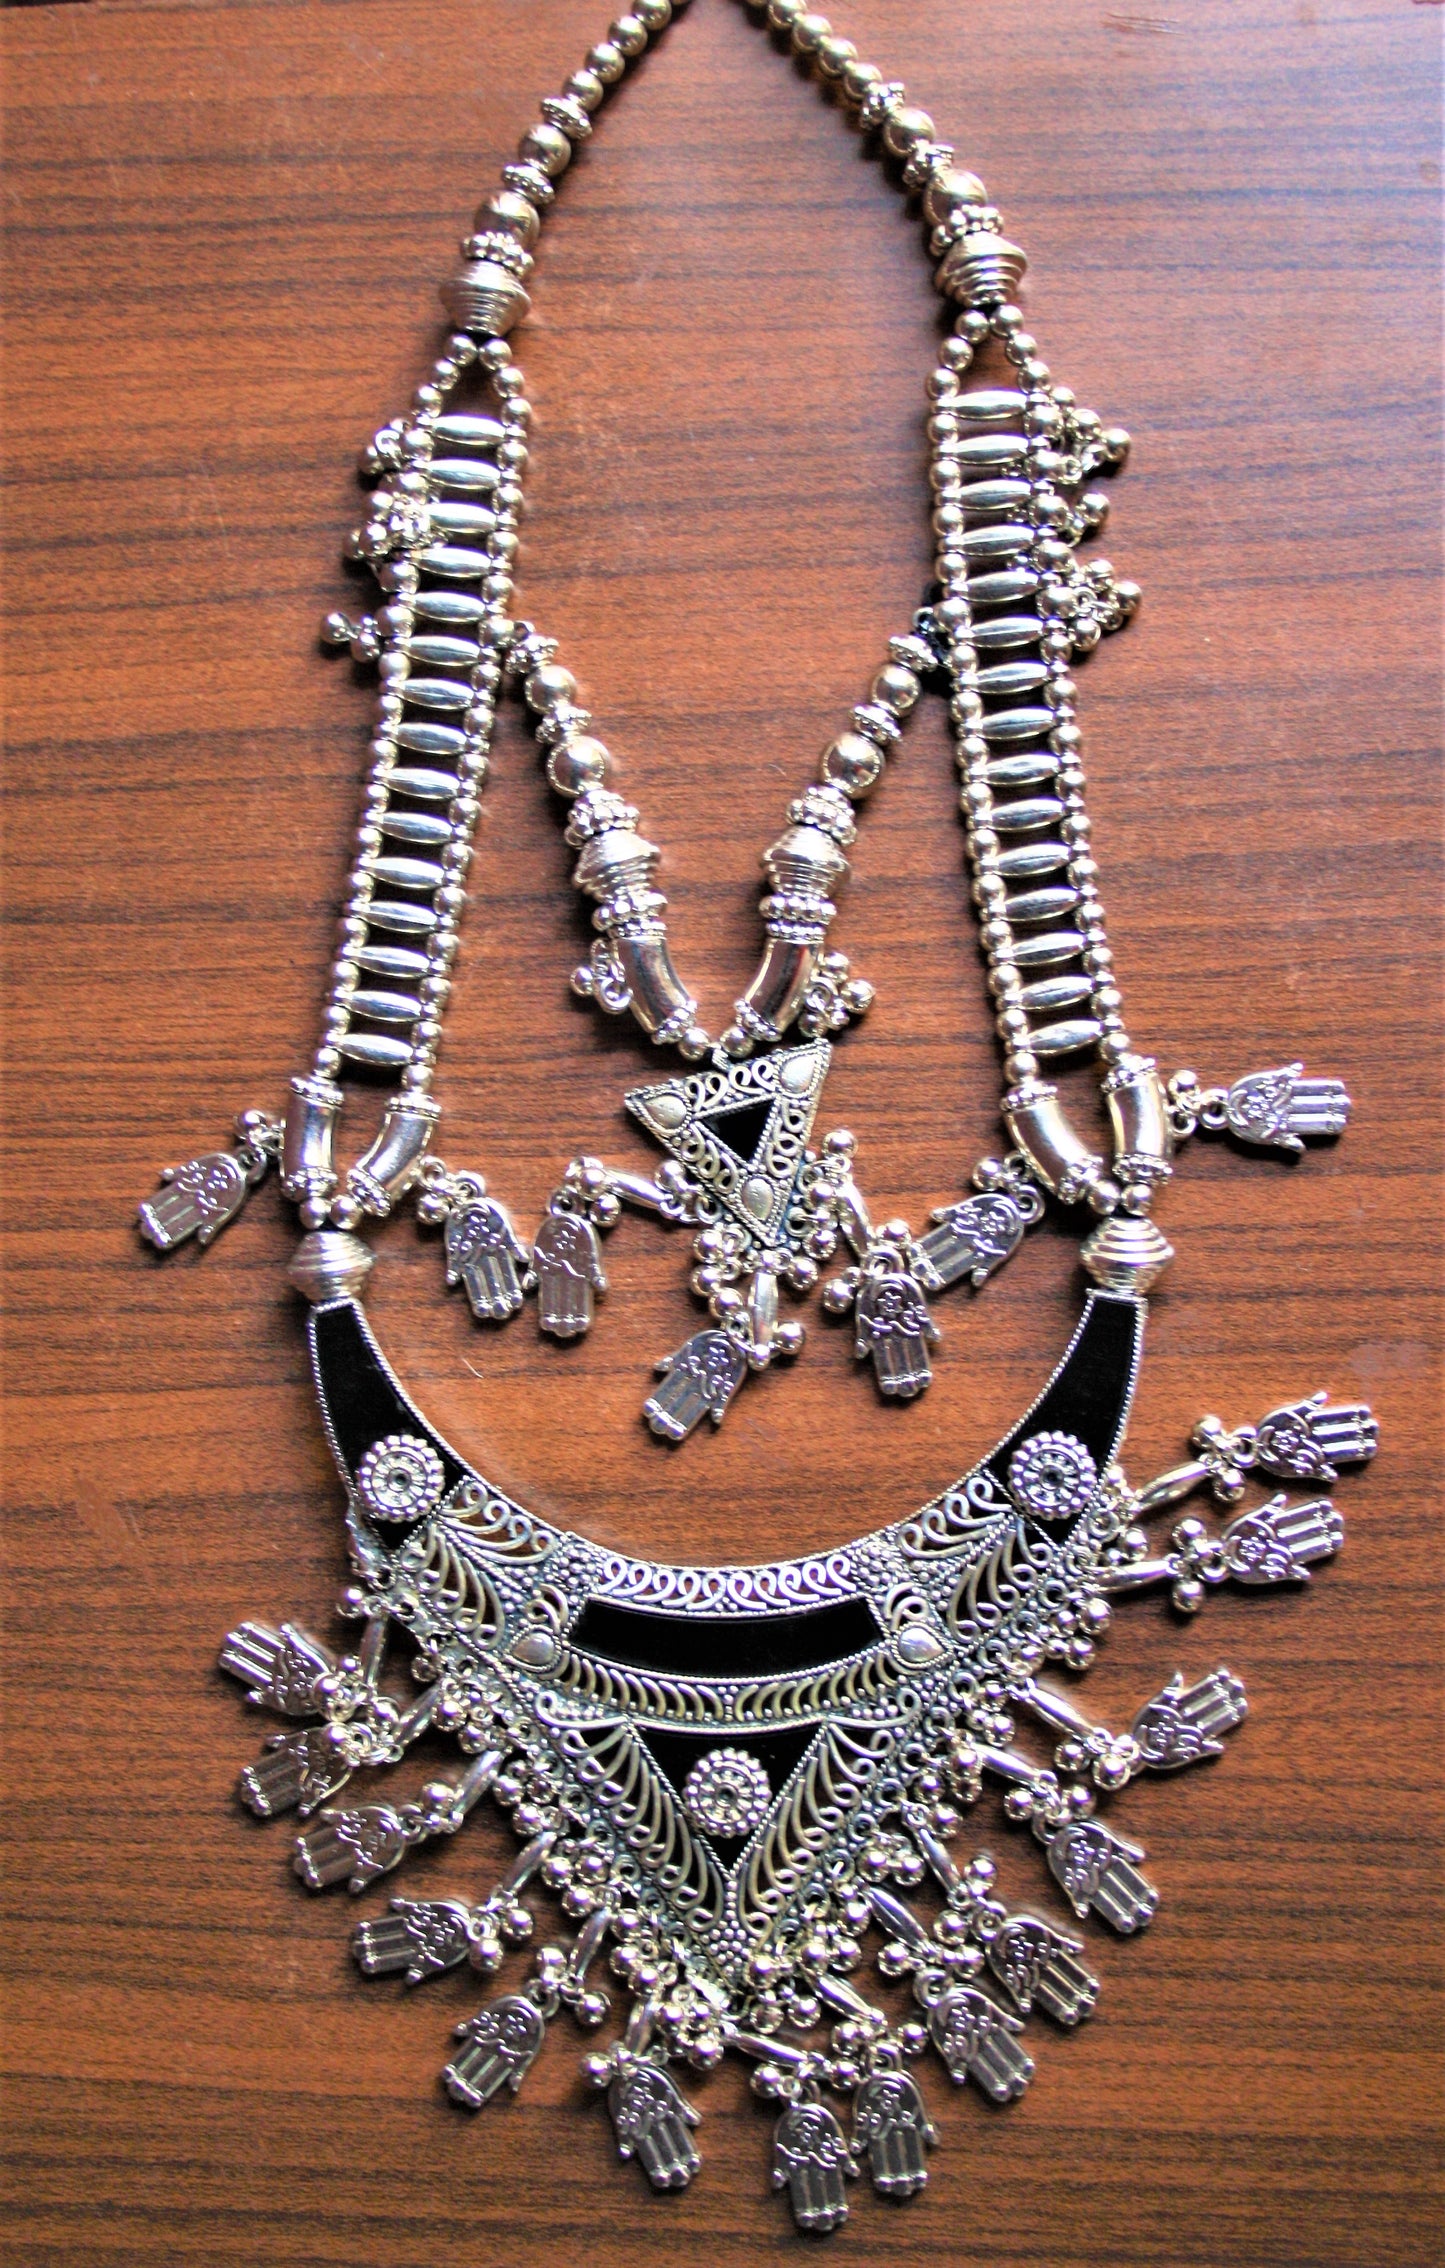 Long Double Layered Black Silver Oxidized Tribal Necklace with Earrings - GlitterGleam